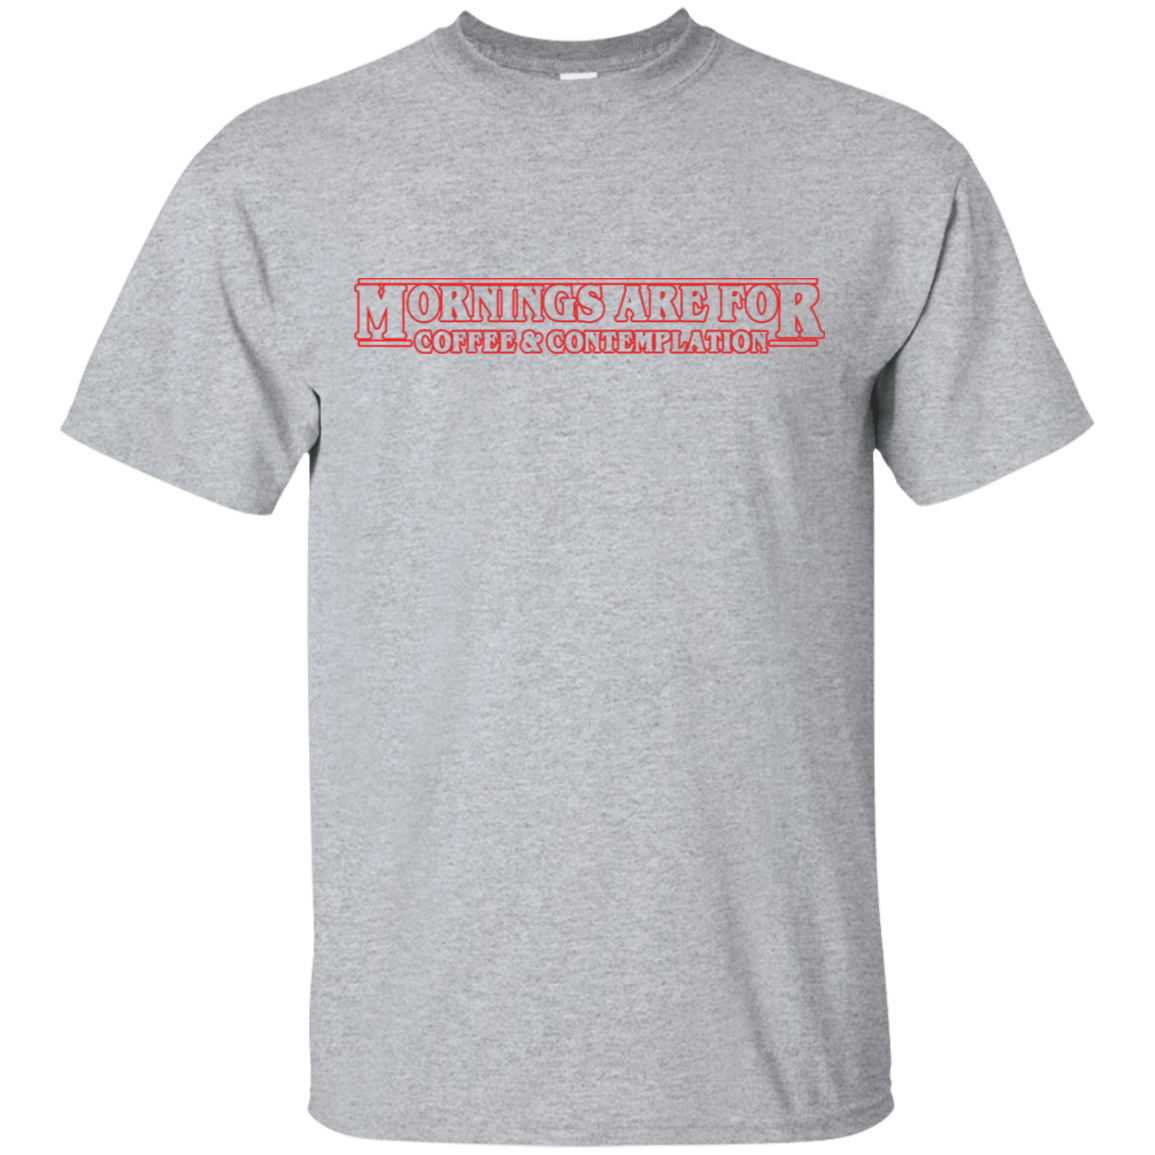 T-Shirts Sport Grey / S Mornings are for Coffee and Contemplation T-Shirt